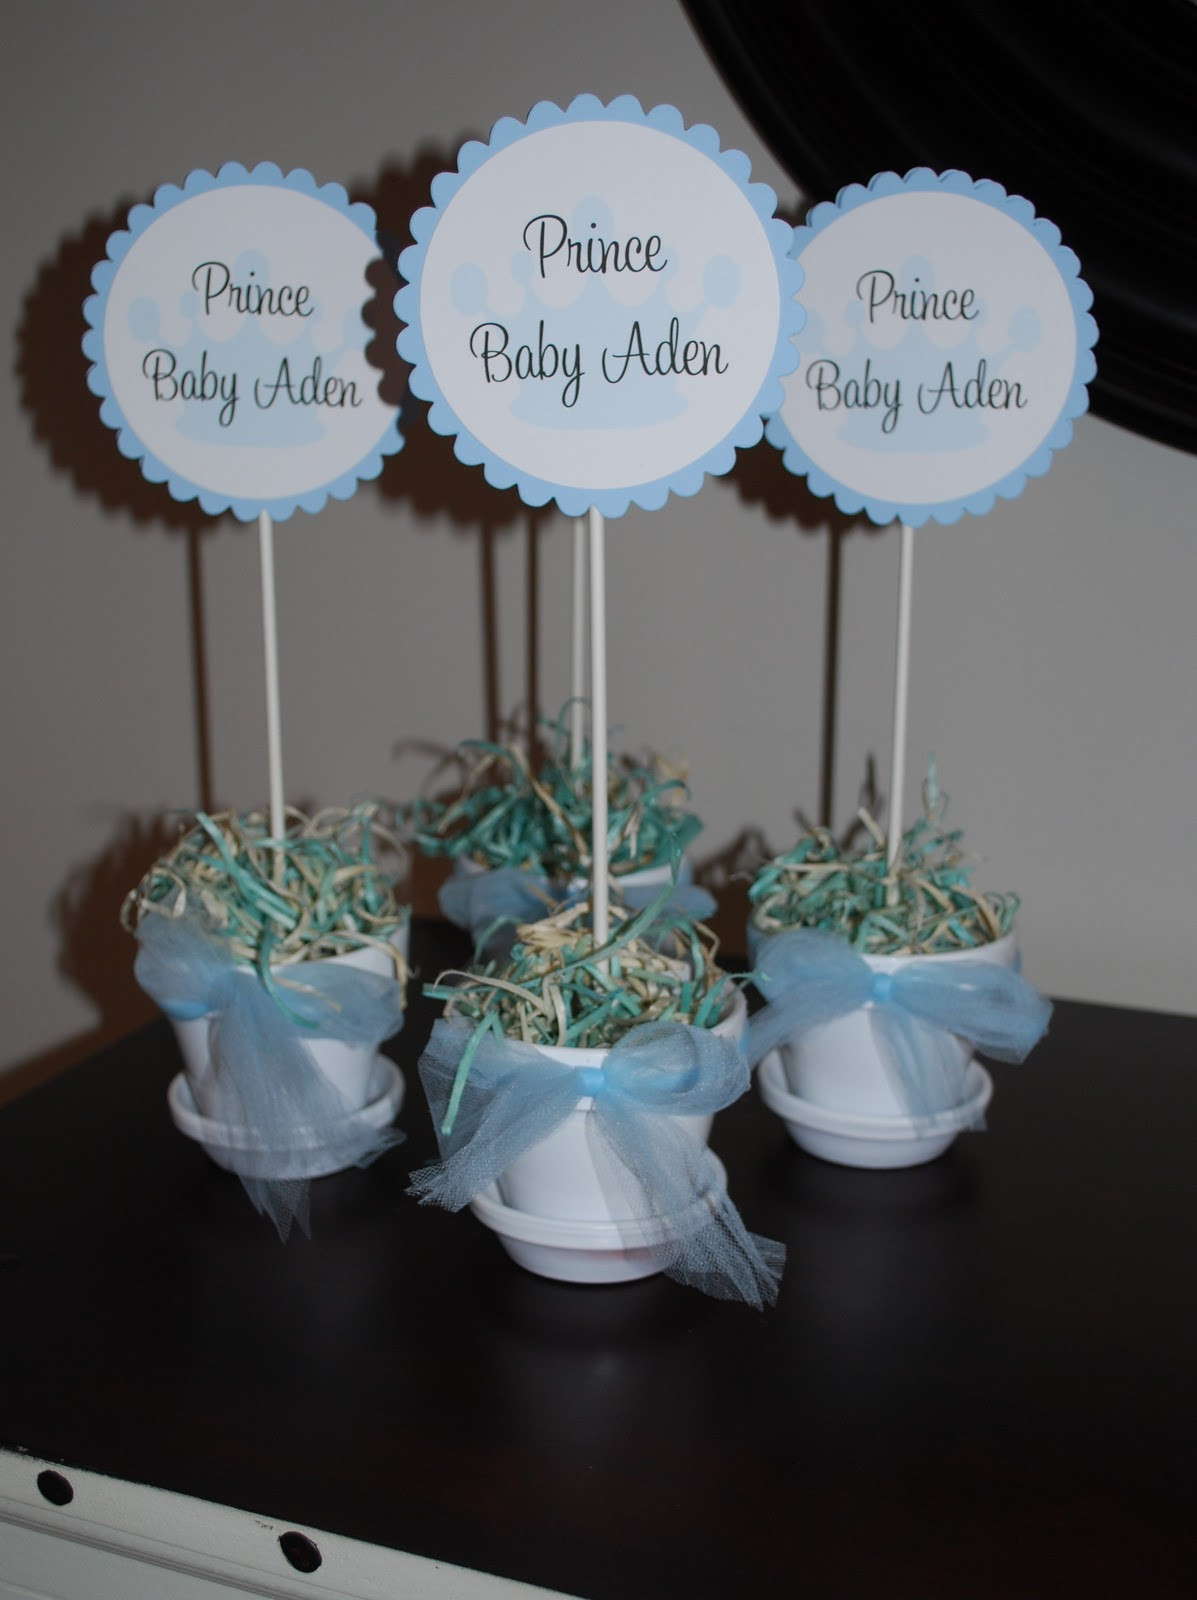 Baby Shower Decor Images
 Sweet P Parties Prince Baby Shower